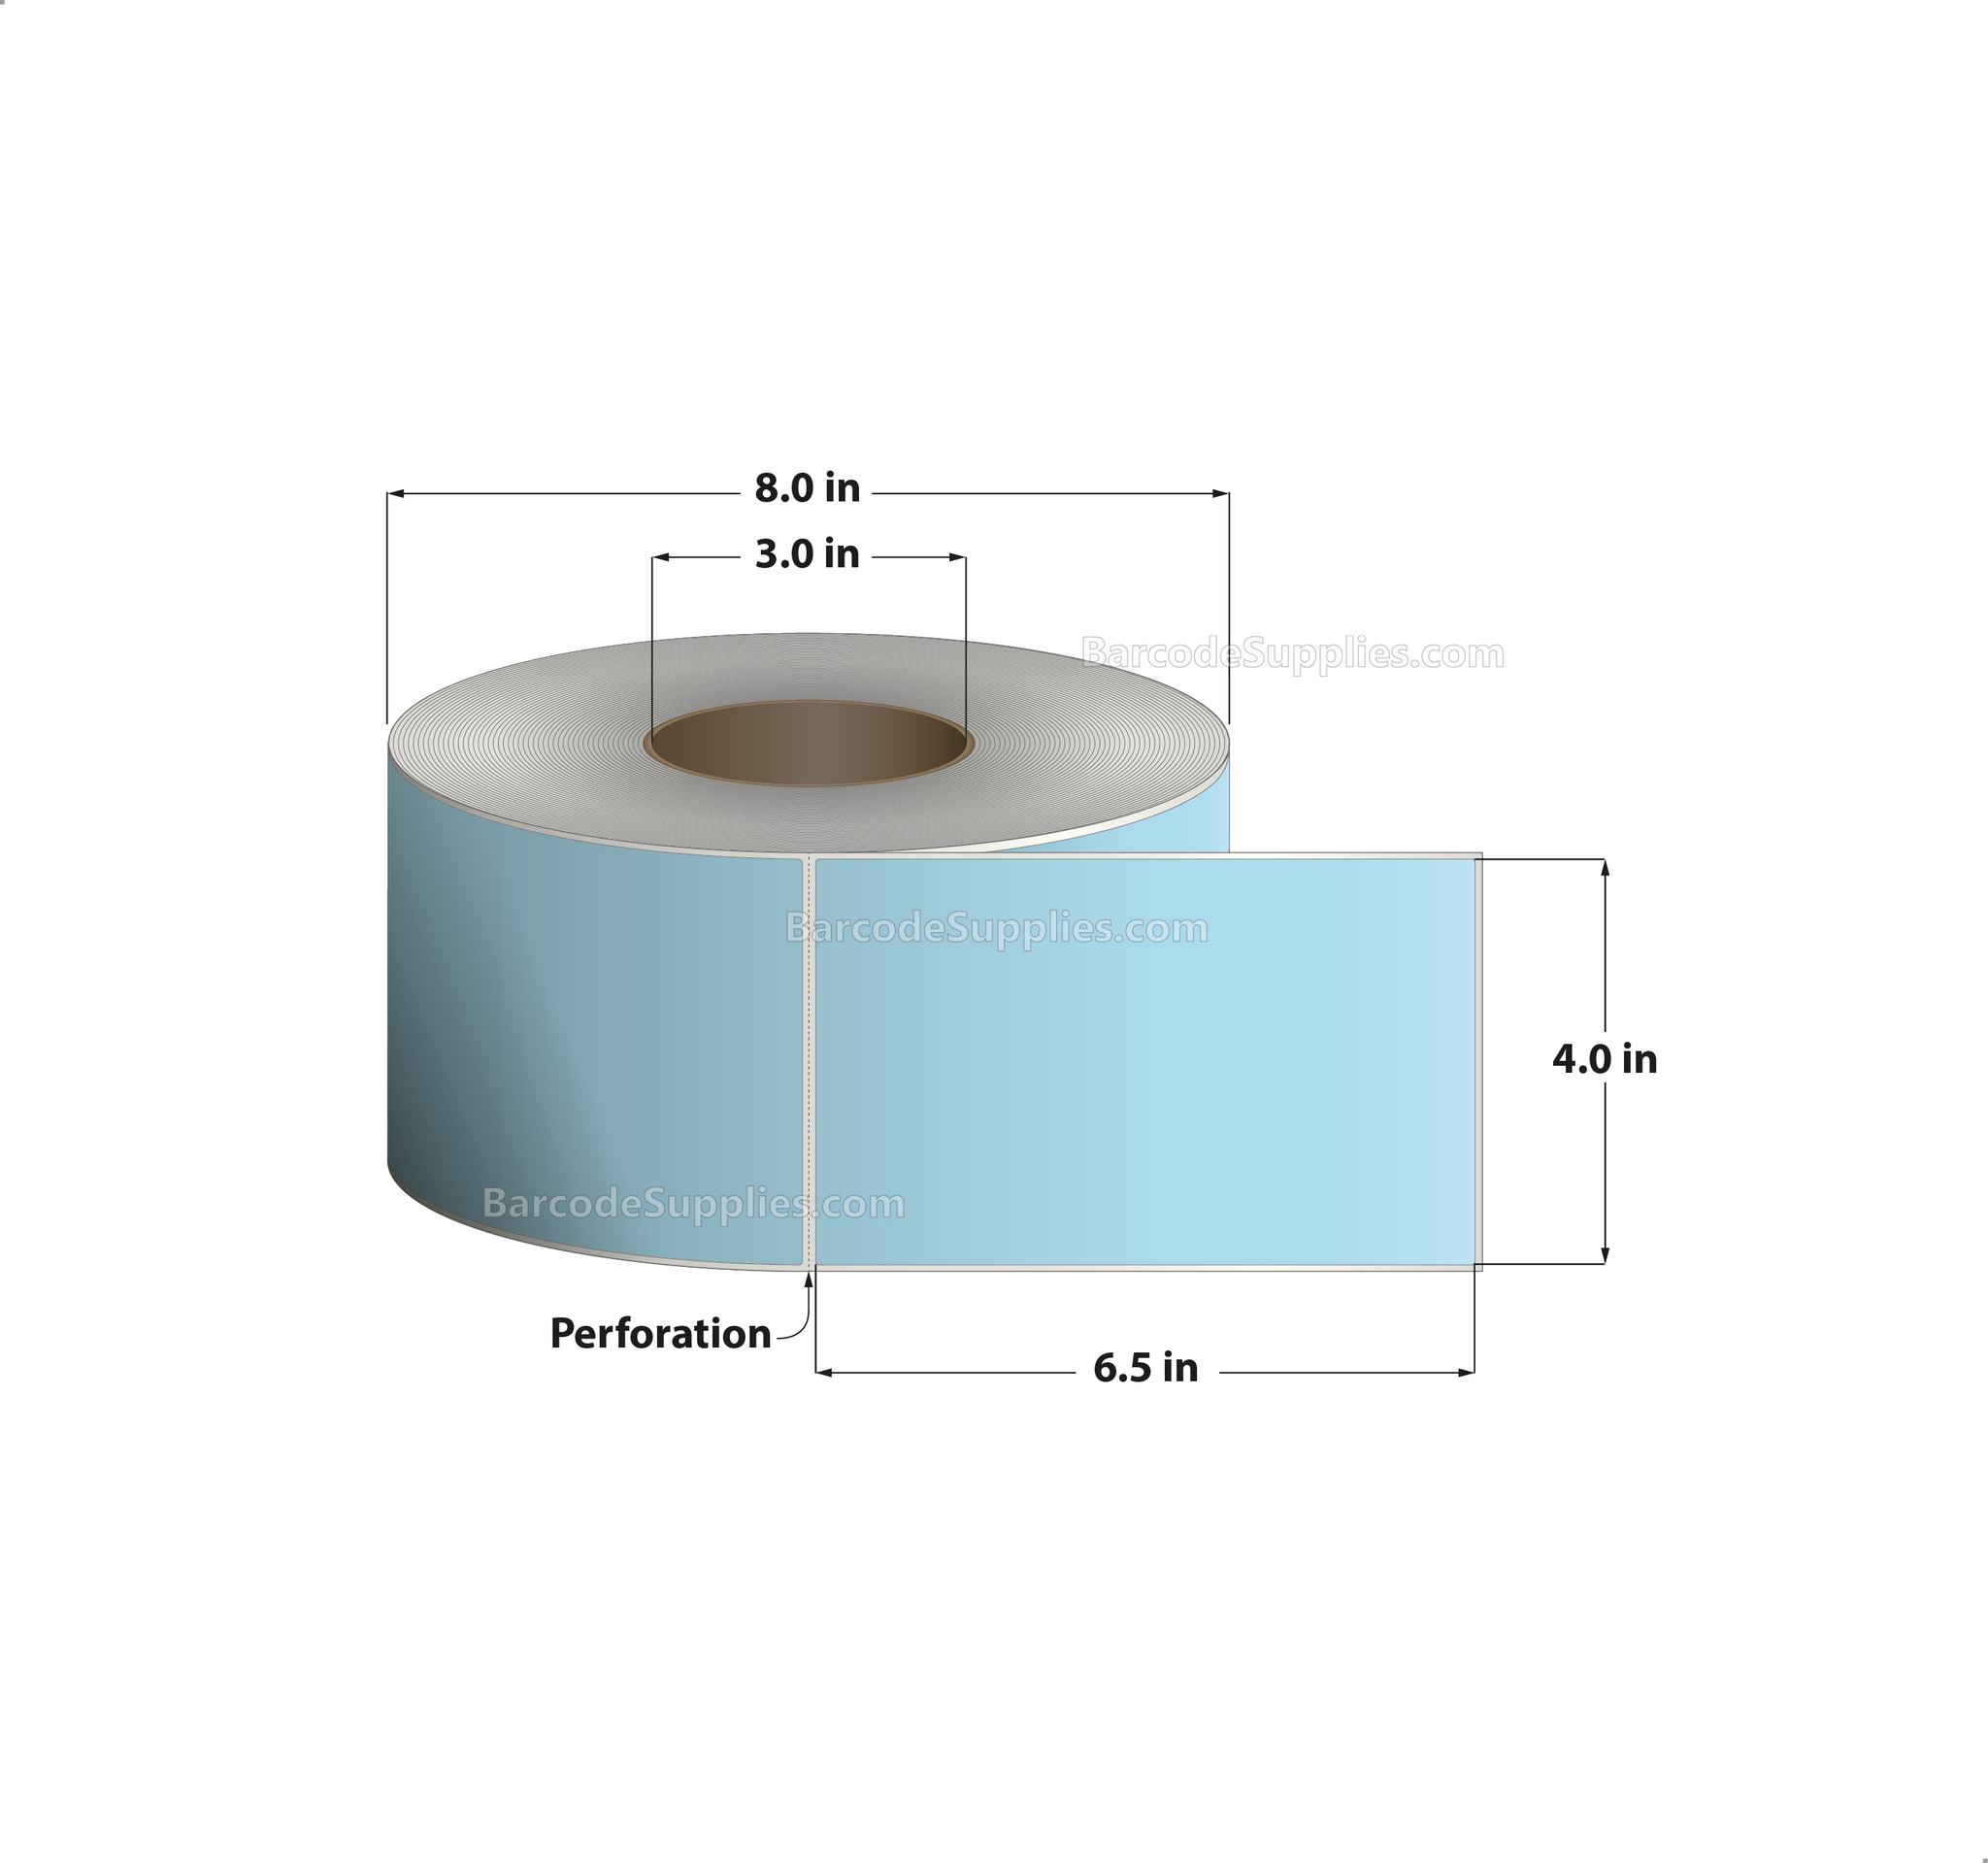 4 x 6.5 Thermal Transfer 290 Blue Labels With Permanent Adhesive - Perforated - 900 Labels Per Roll - Carton Of 4 Rolls - 3600 Labels Total - MPN: RFC-4-65-900-BL